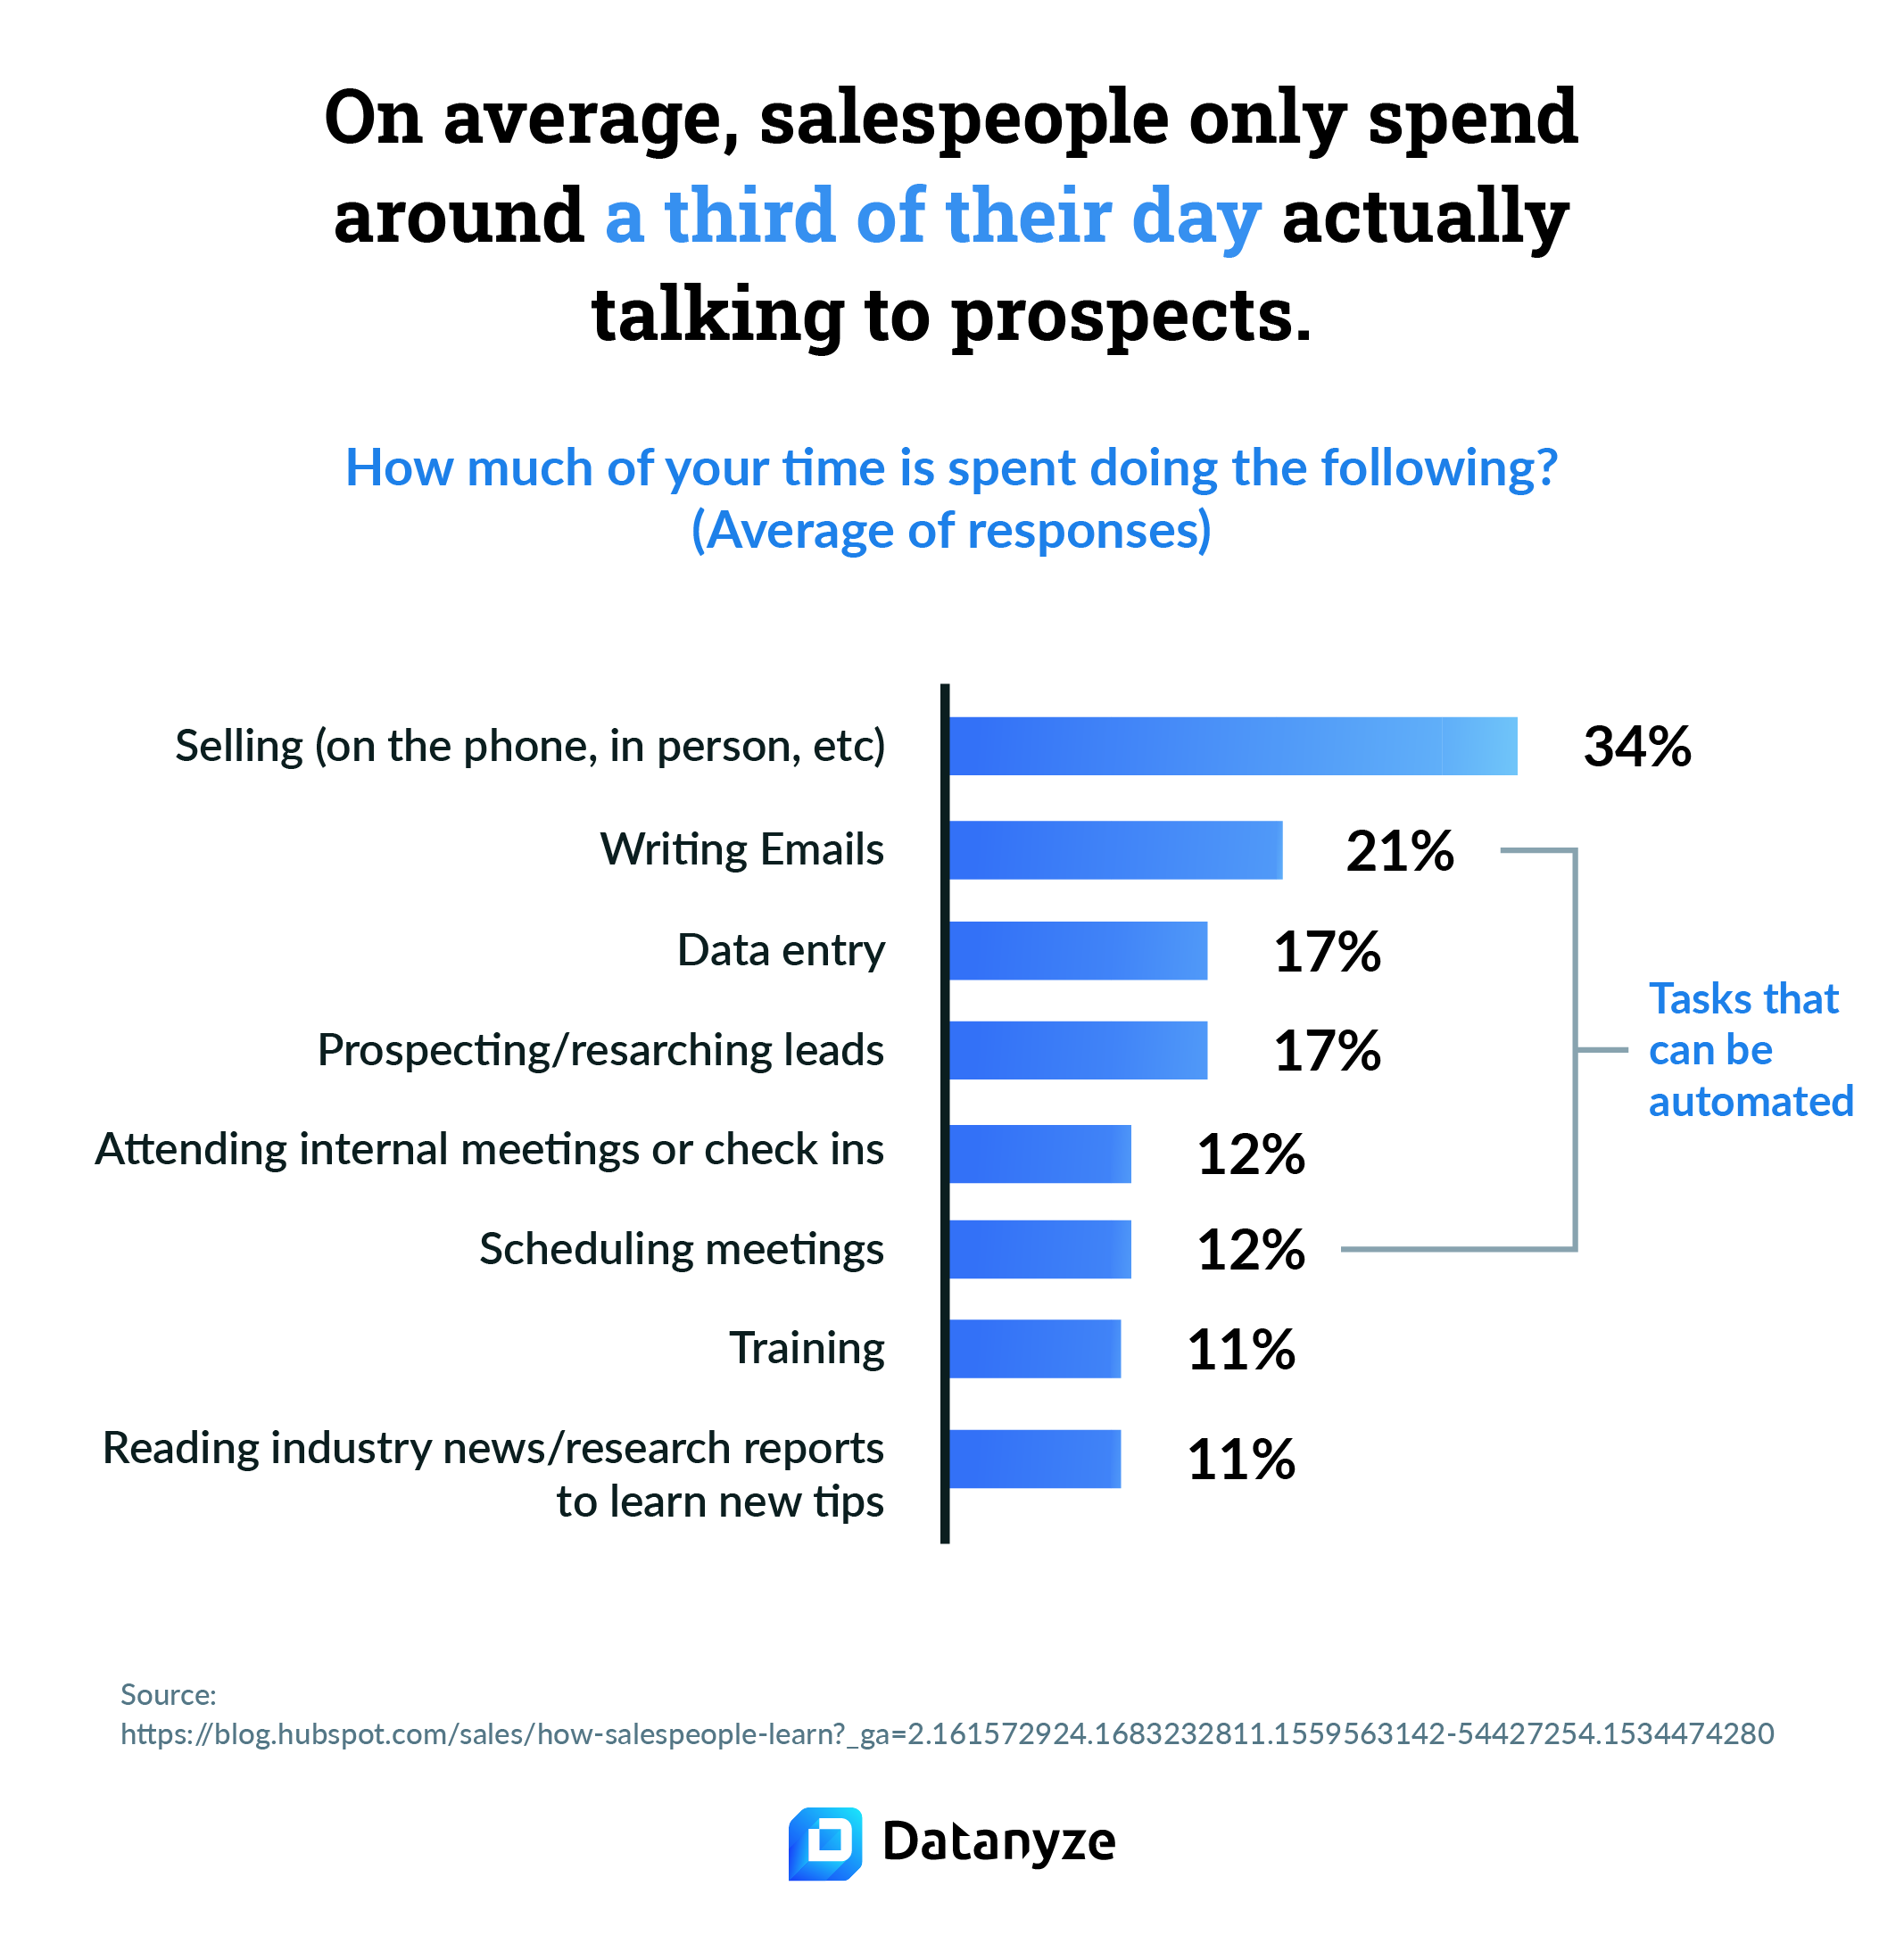 salespeople only spend a third of their day actually talking to prospects